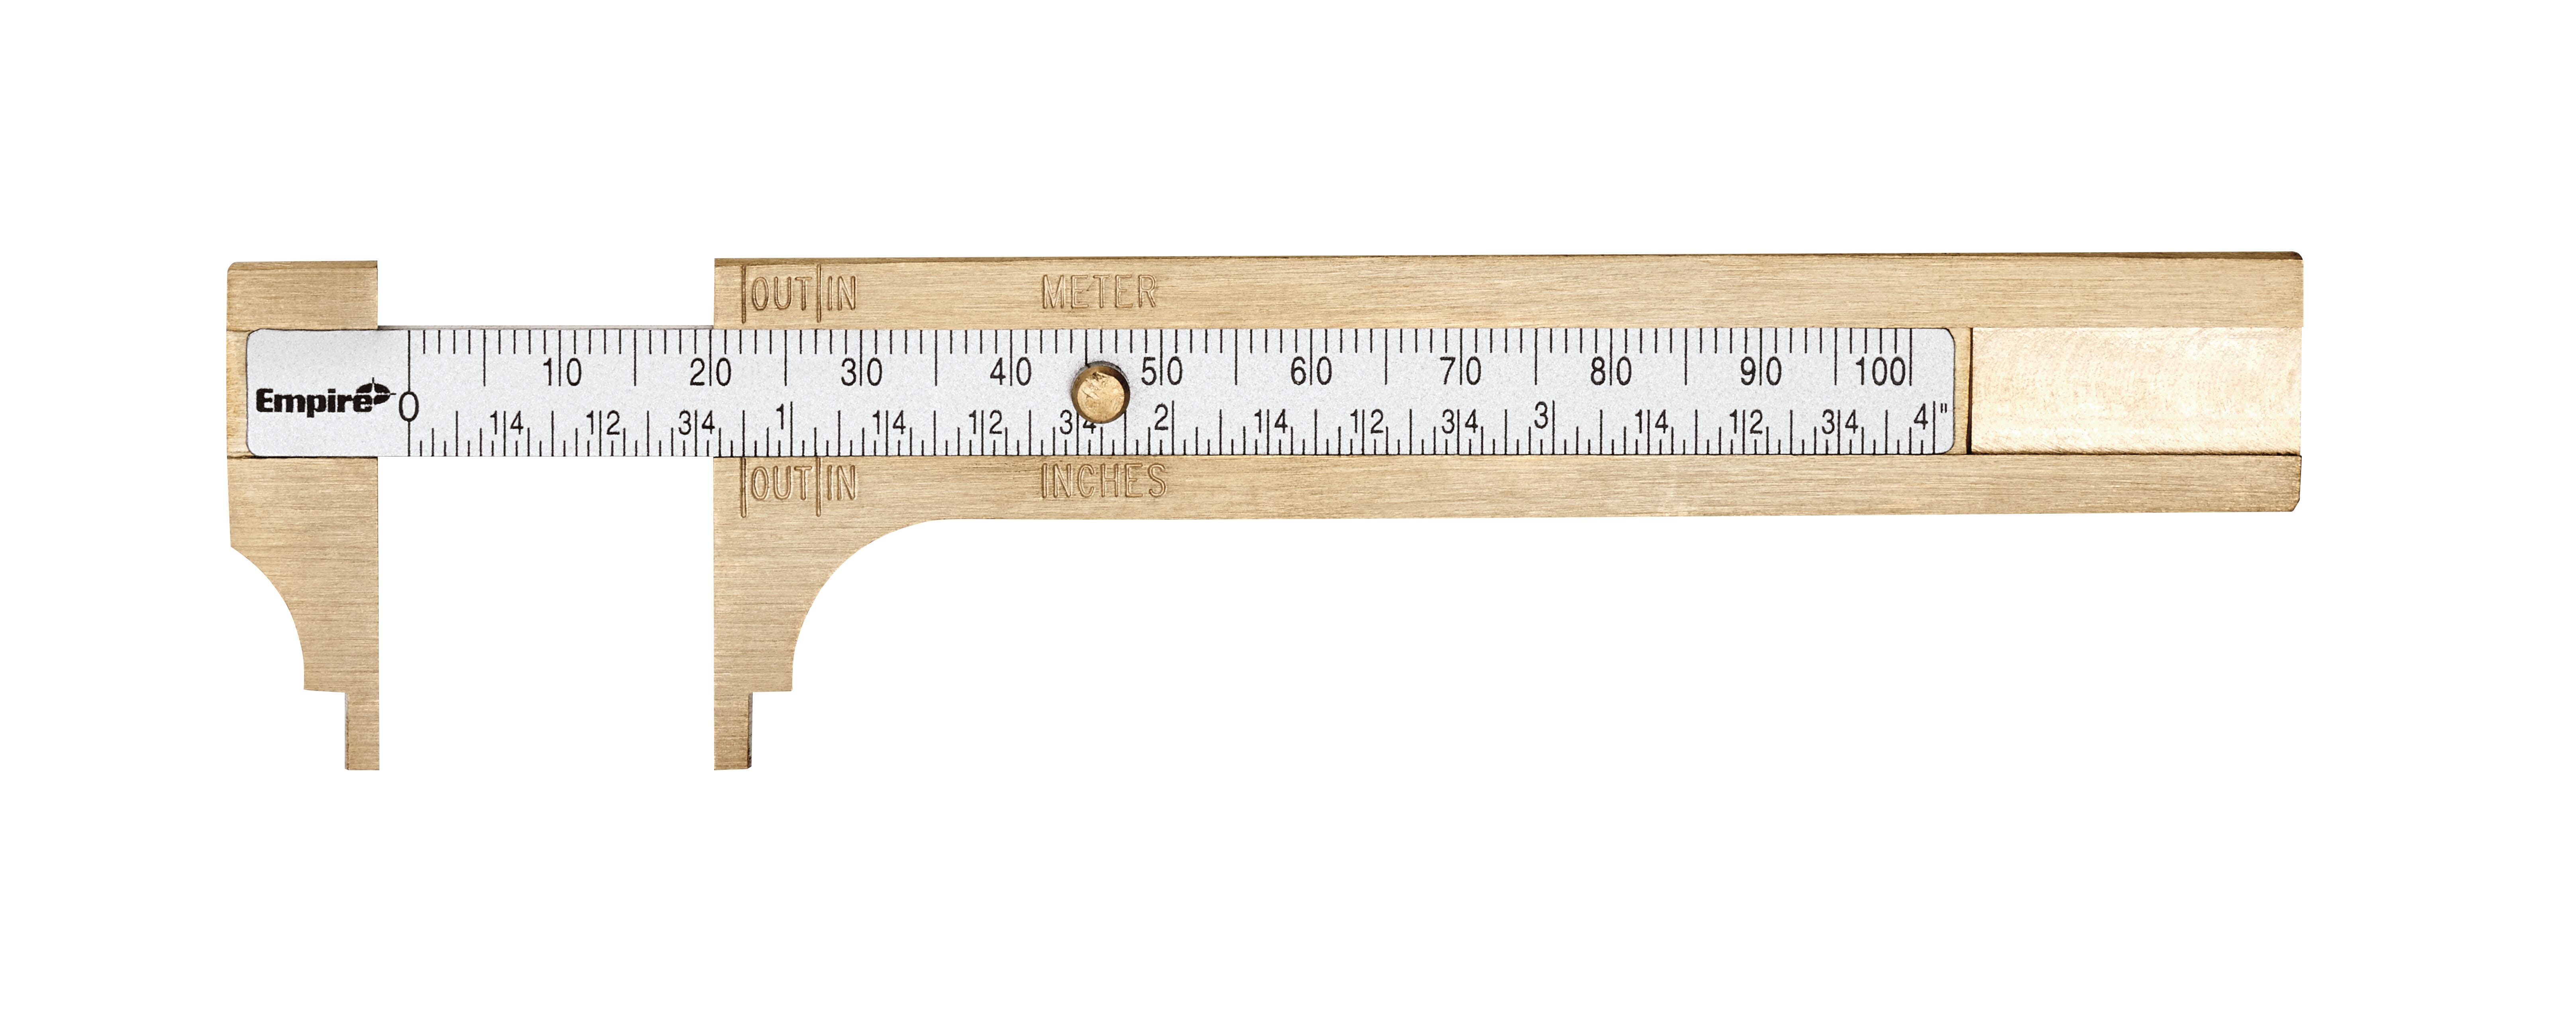 Milwaukee® Empire® 2783 Pocket Caliper, 0 to 4 in Measuring, Graduations 1/32 in, 4 in D Jaw, Brass